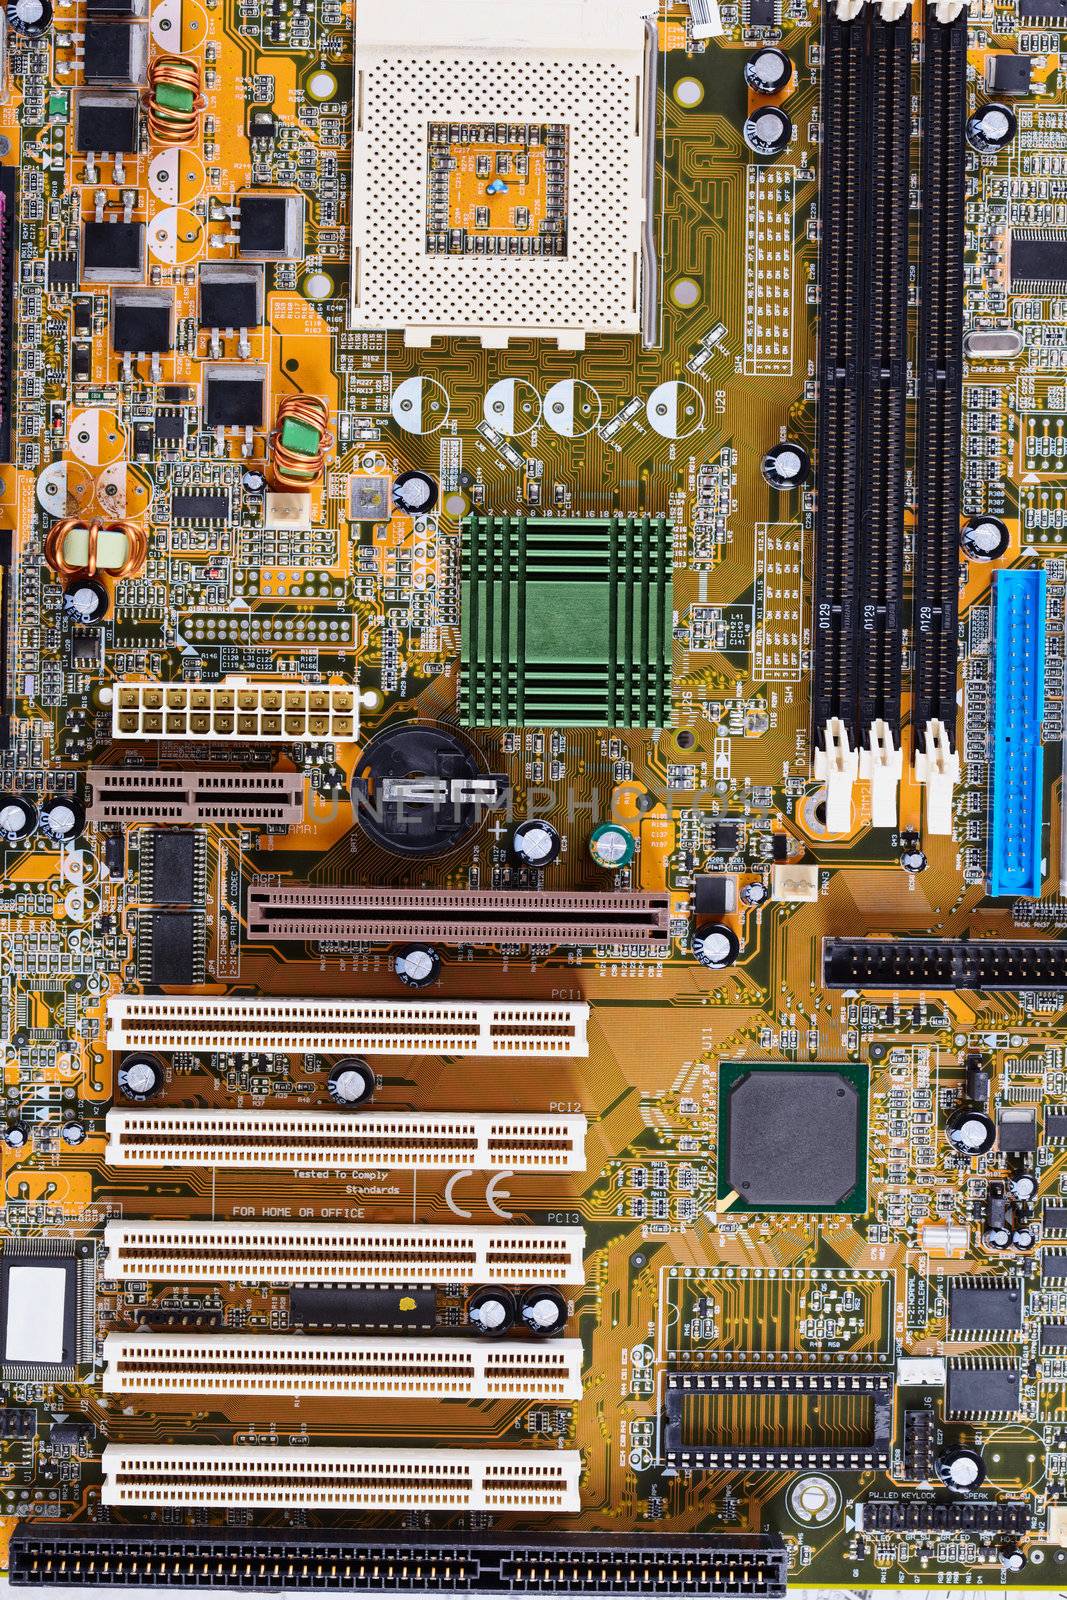 The computer old motherboard photographed close up